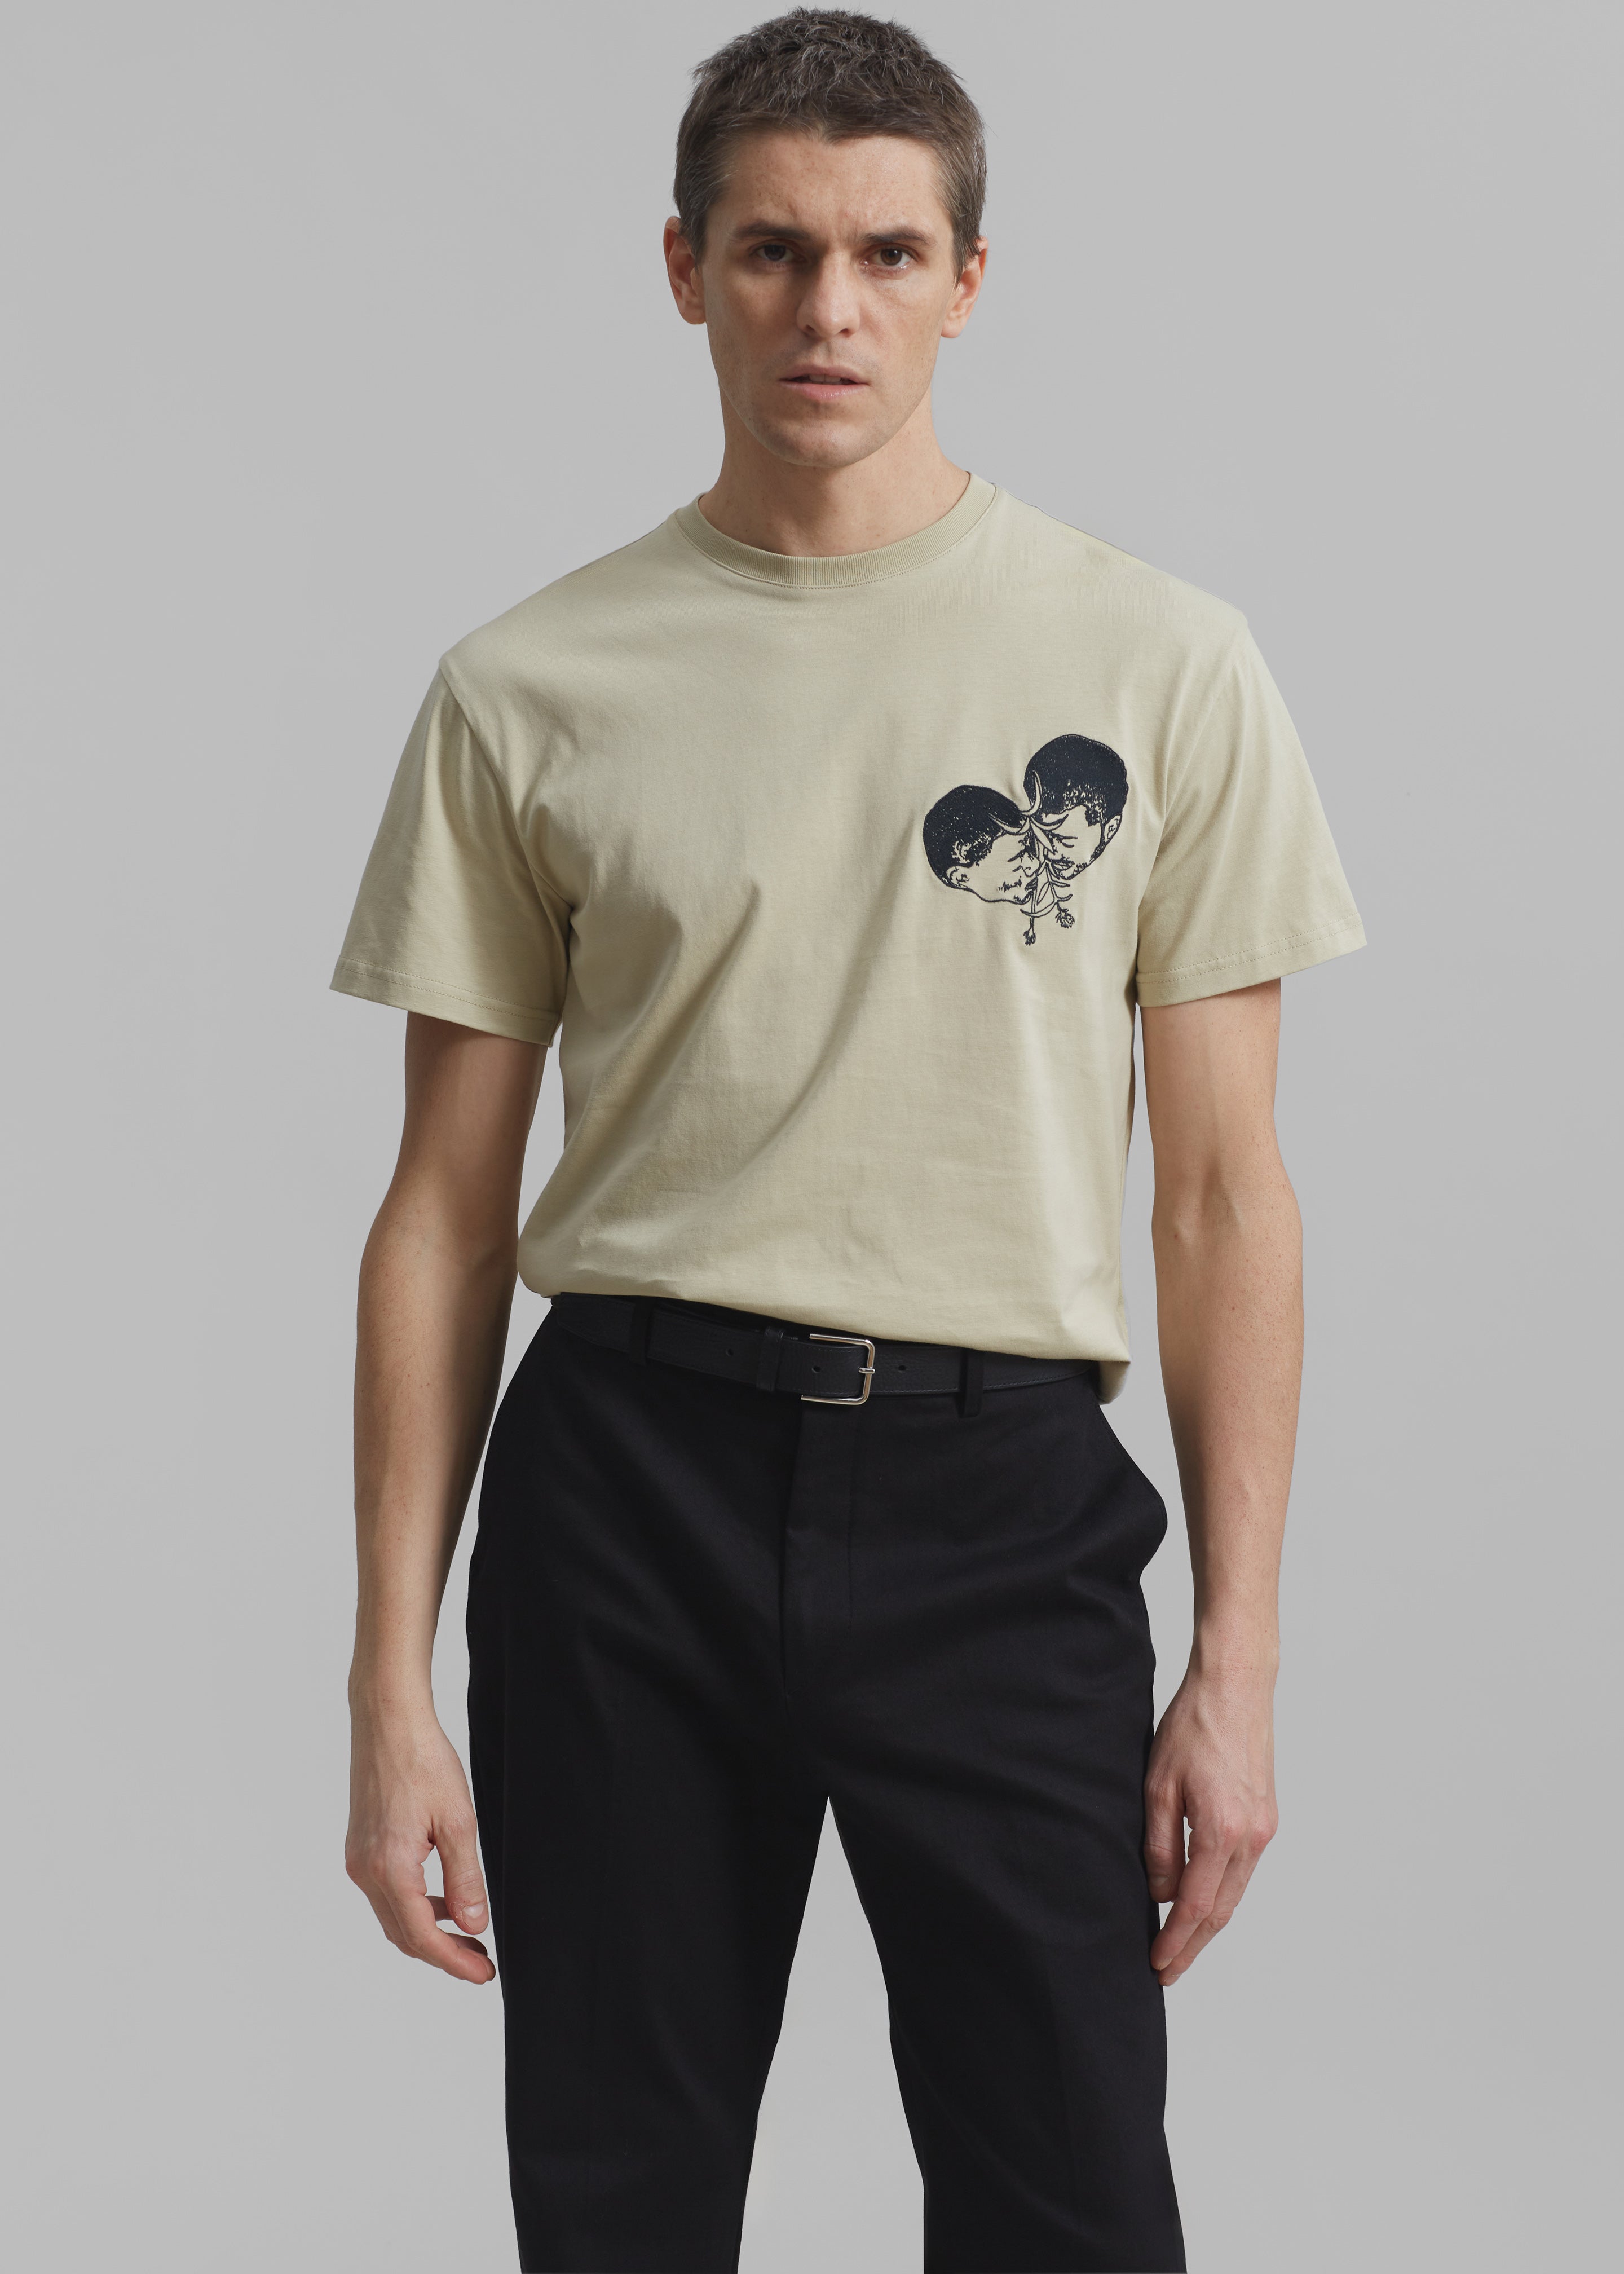 JW Anderson Polo Couple Embroidery T-Shirt - Beige - 2